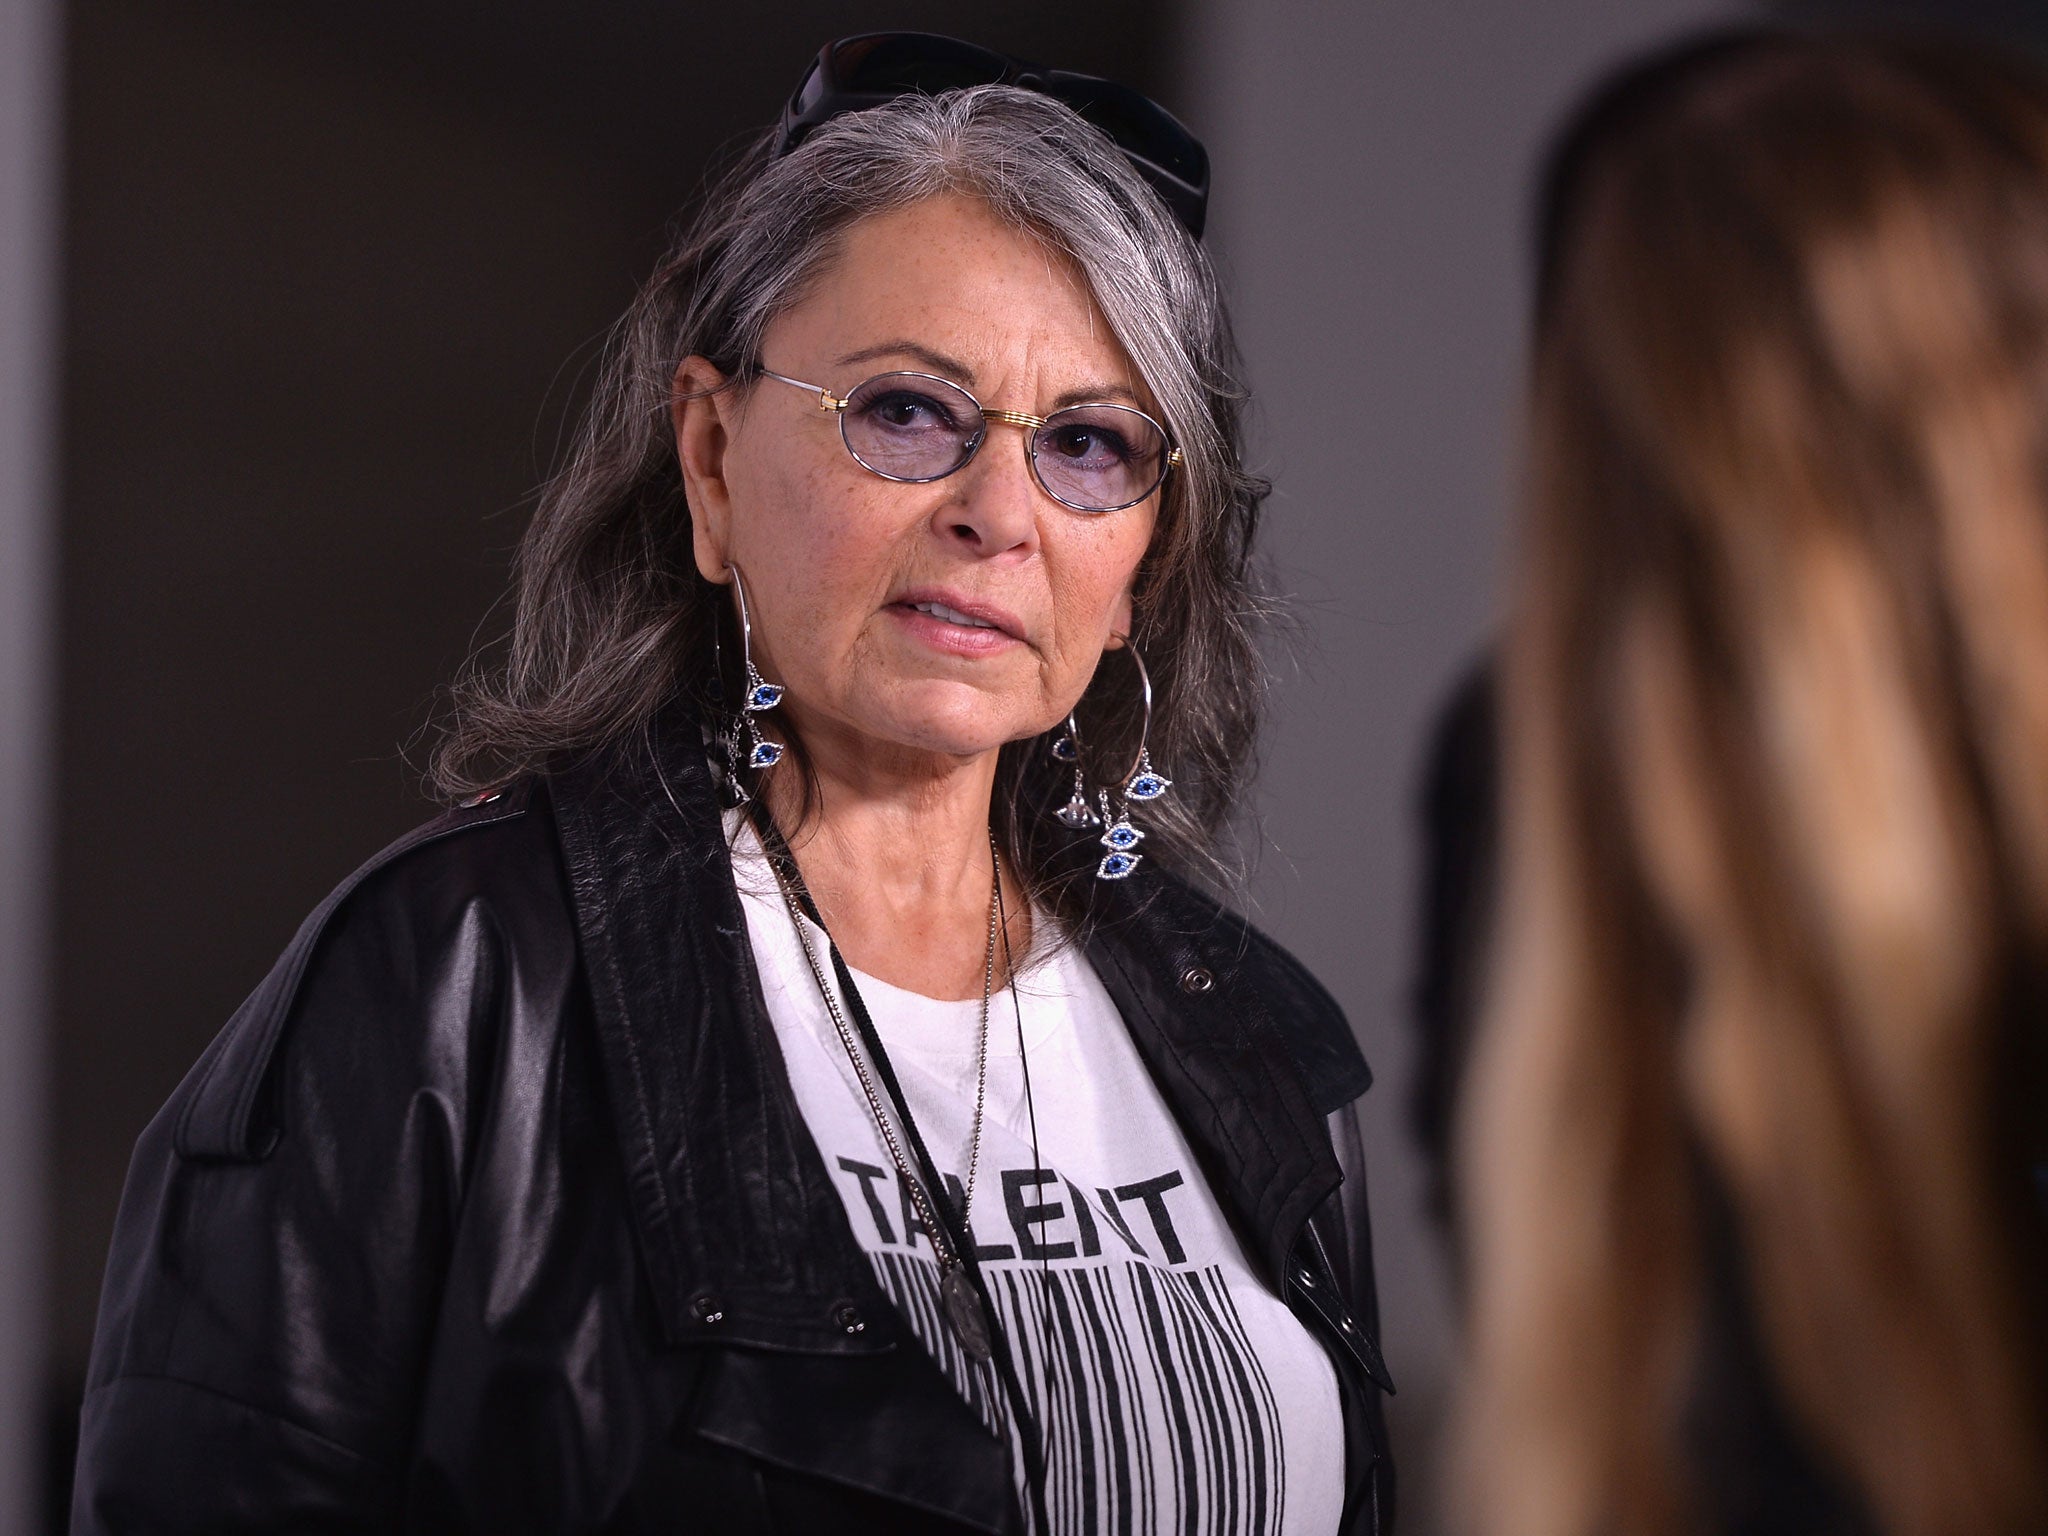 The parents of George Zimmerman, the man who shot and fatally wounded black teenager Trayvon Martin in 2012, have announced they will sue comedian Roseanne Barr for tweeting their home address and forcing them into hiding ‘for years’.